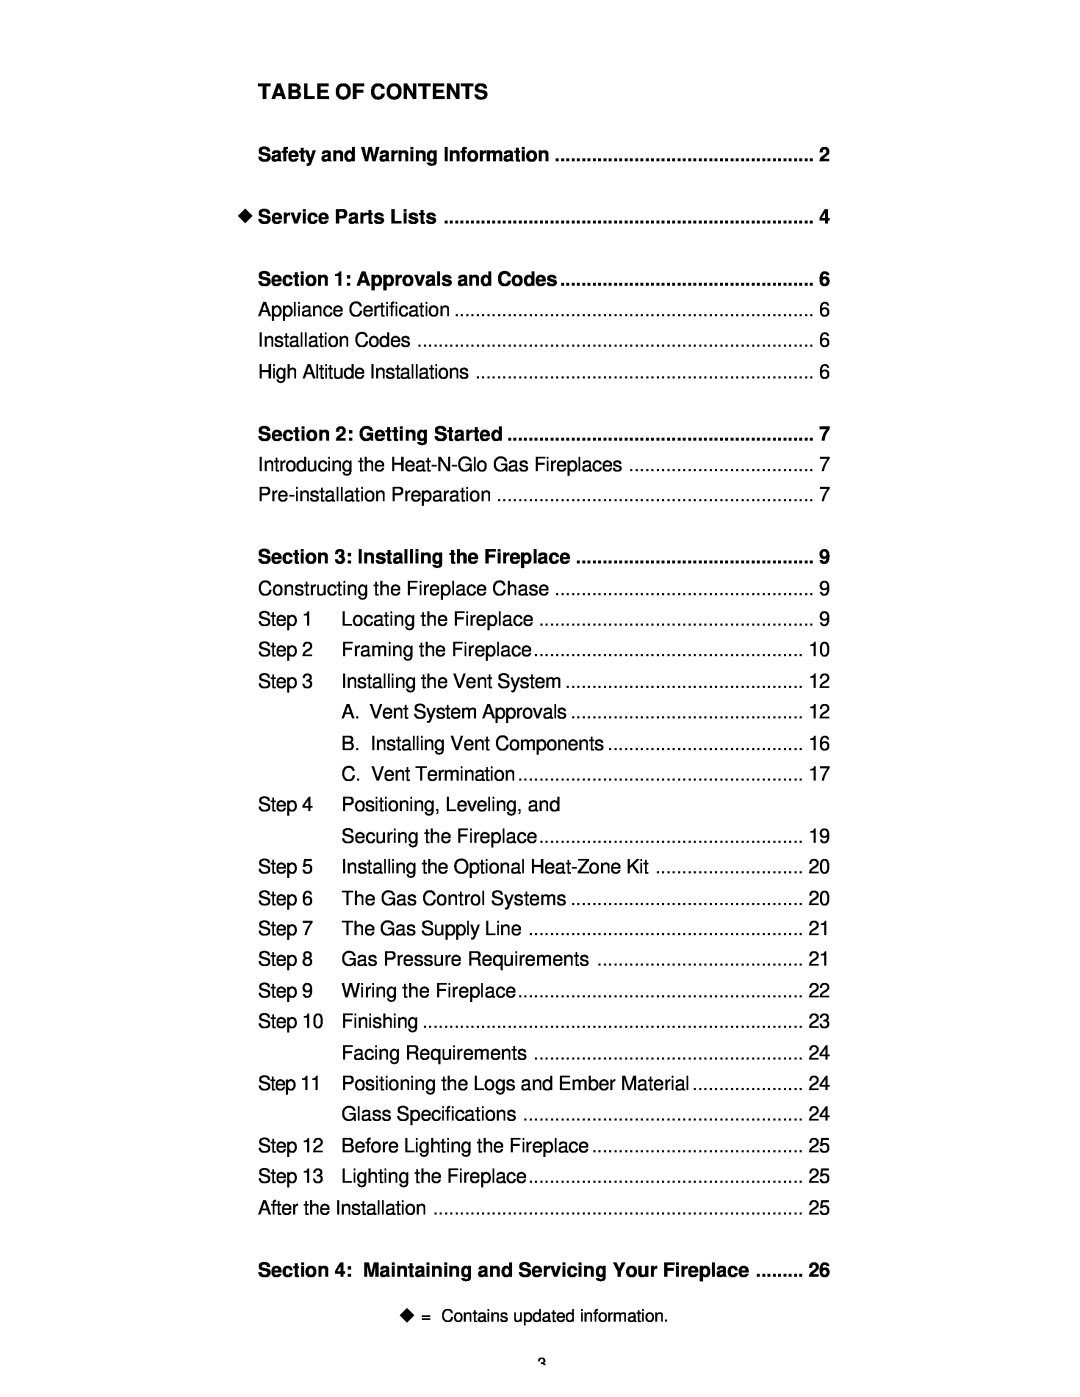 Heat & Glo LifeStyle 36DV manual Table Of Contents 